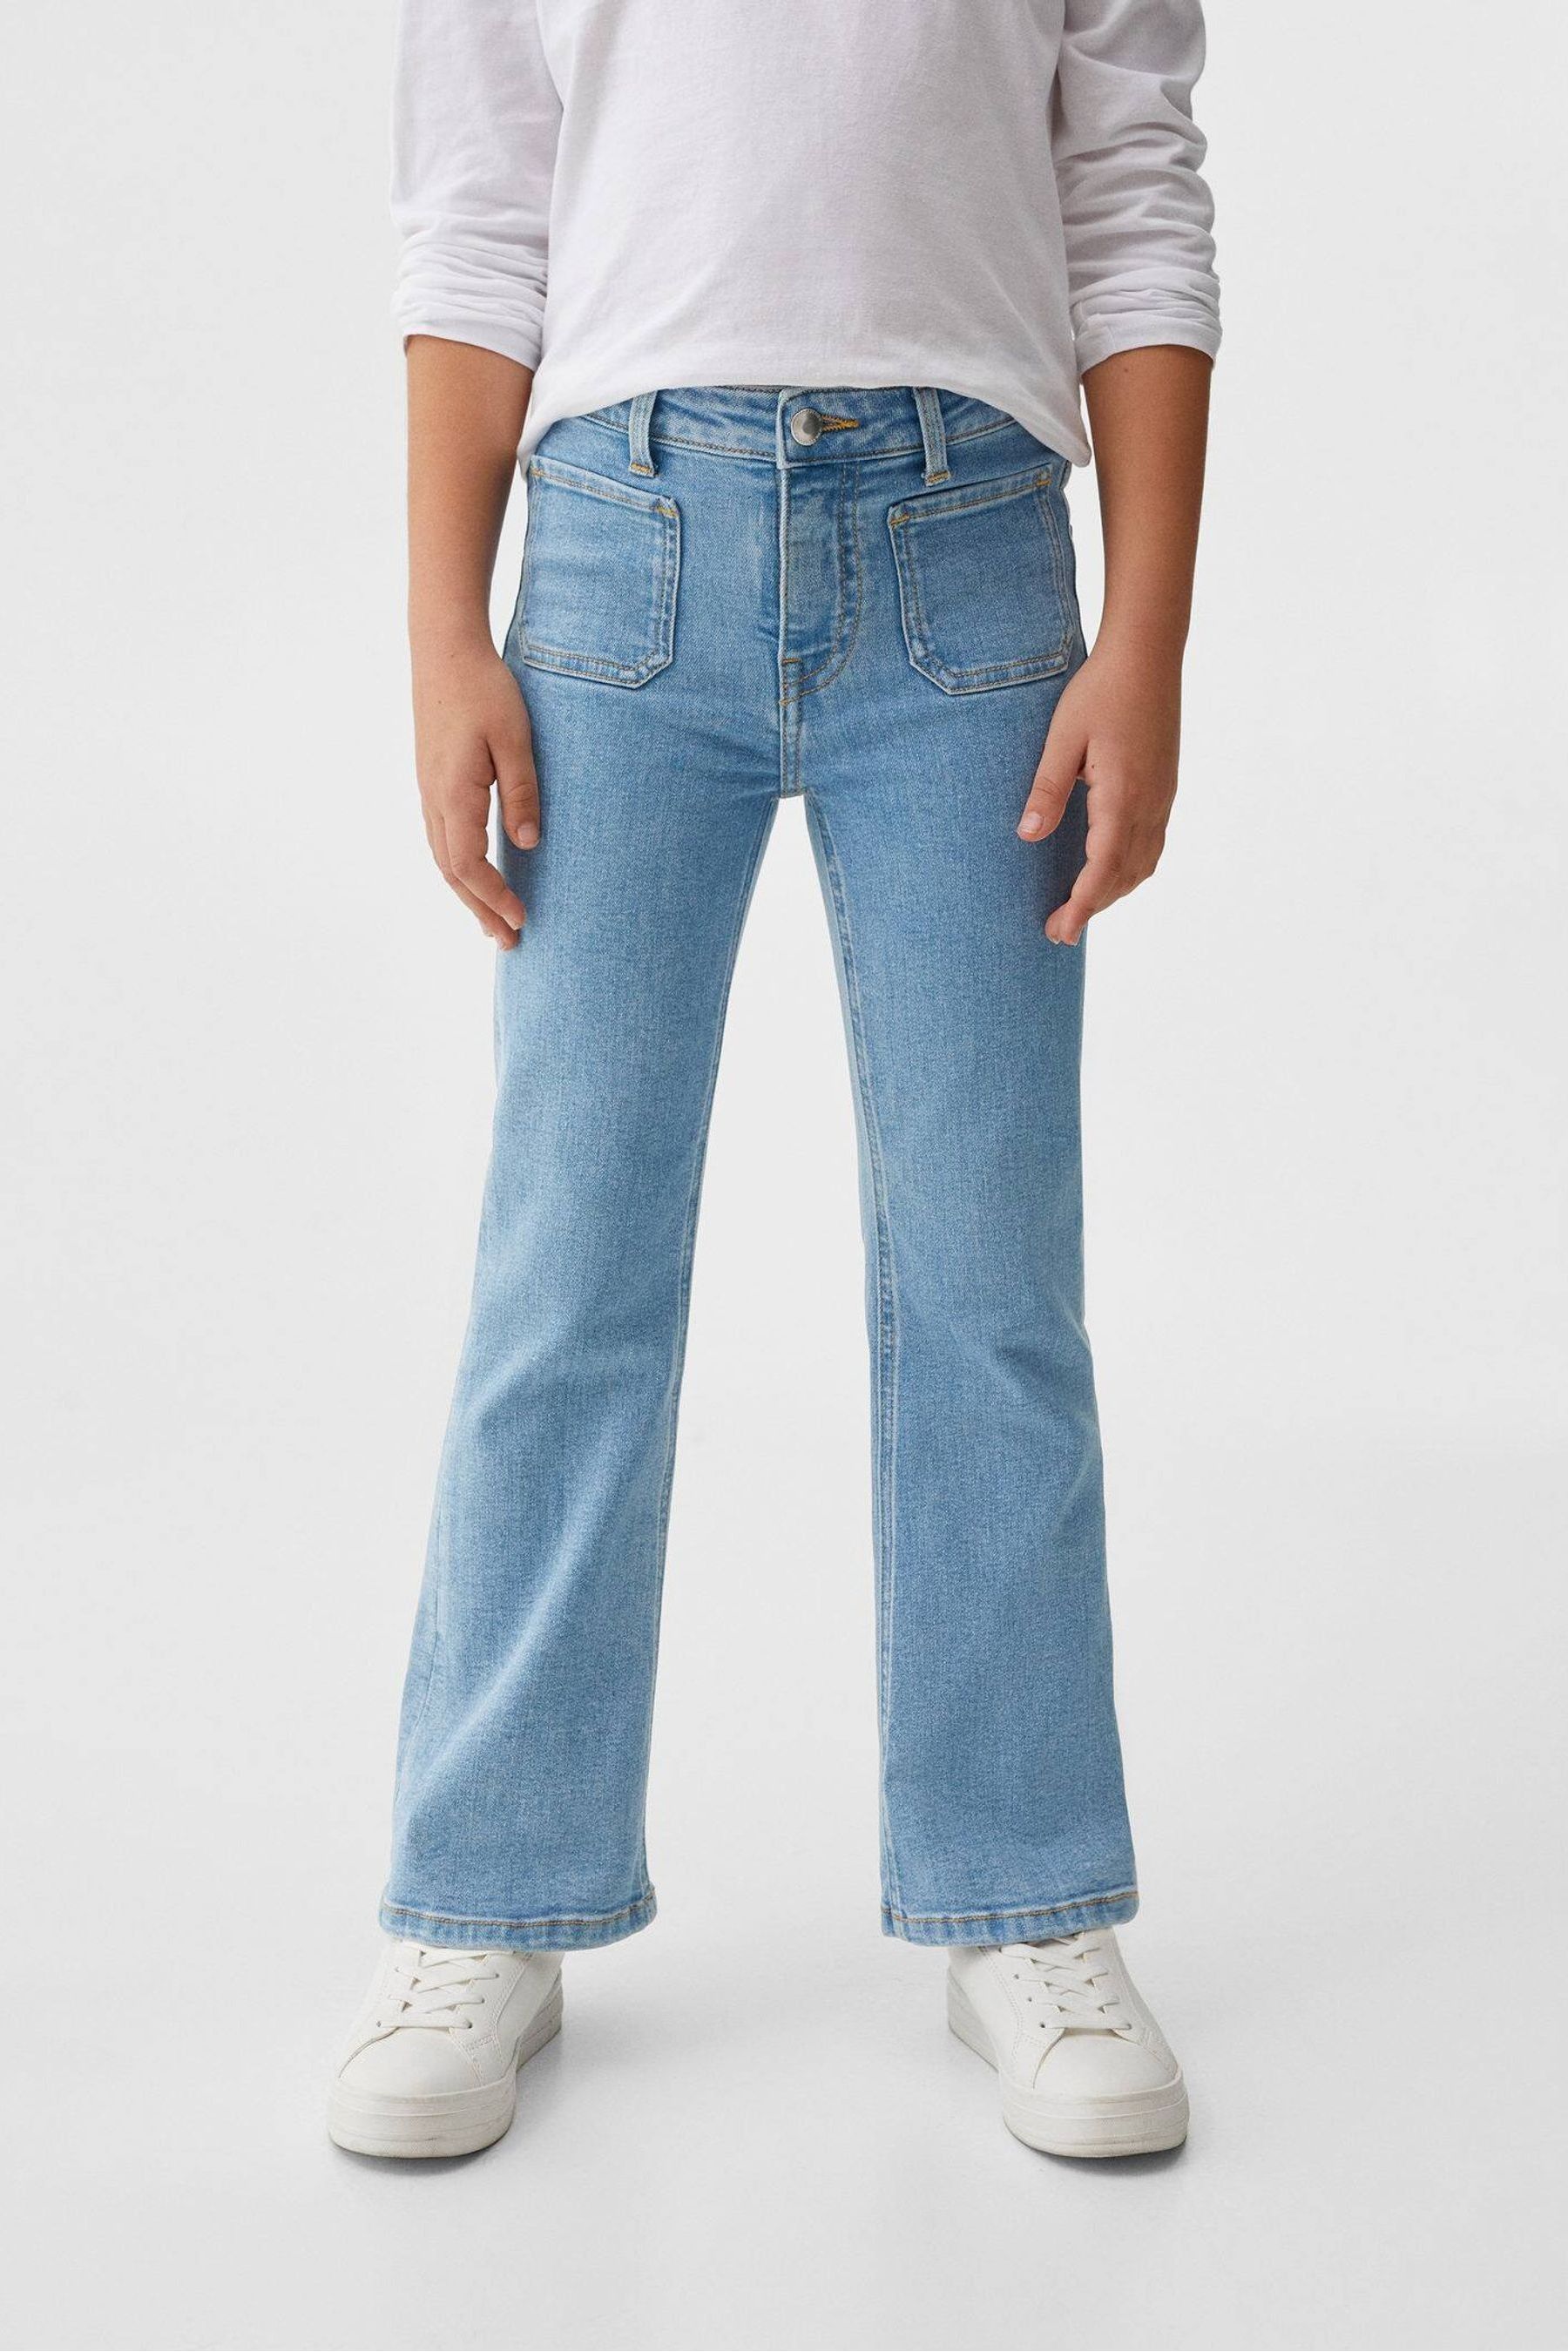 Buy Mango Blue Flared Jeans With Pocket from the Next UK online shop